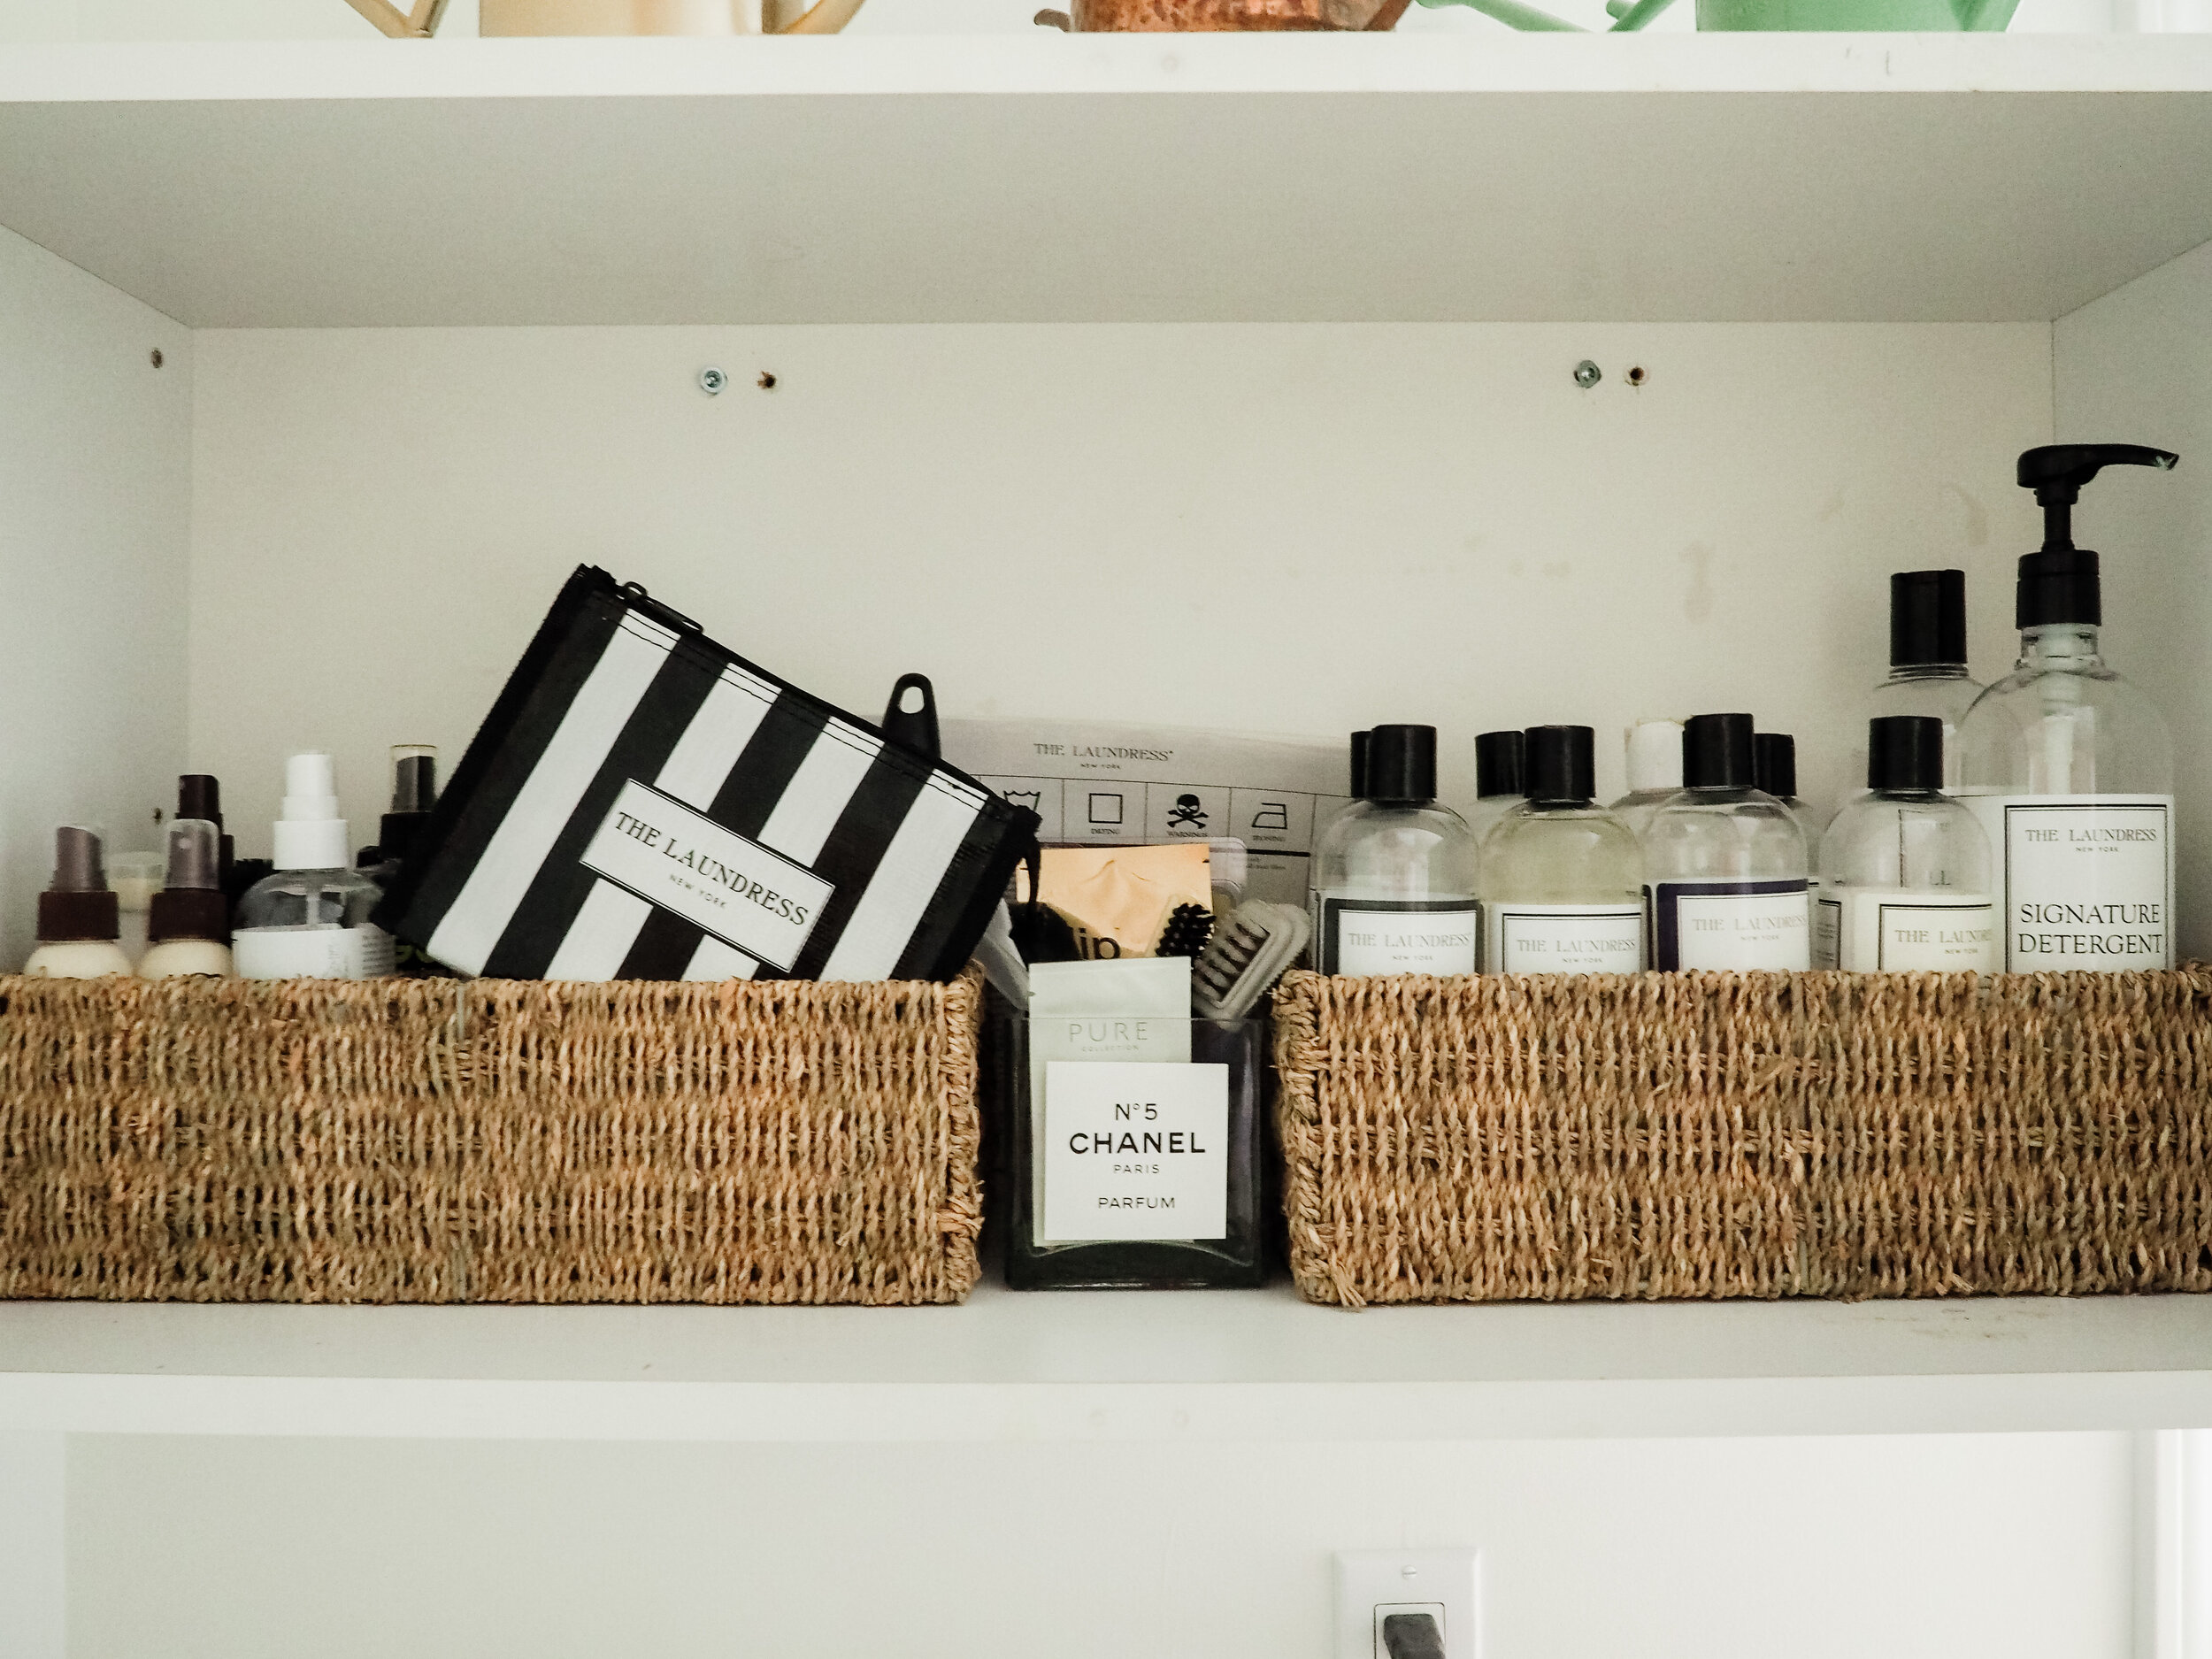 My favorite Laundress cleaning supplies inside the cabinet above the sink